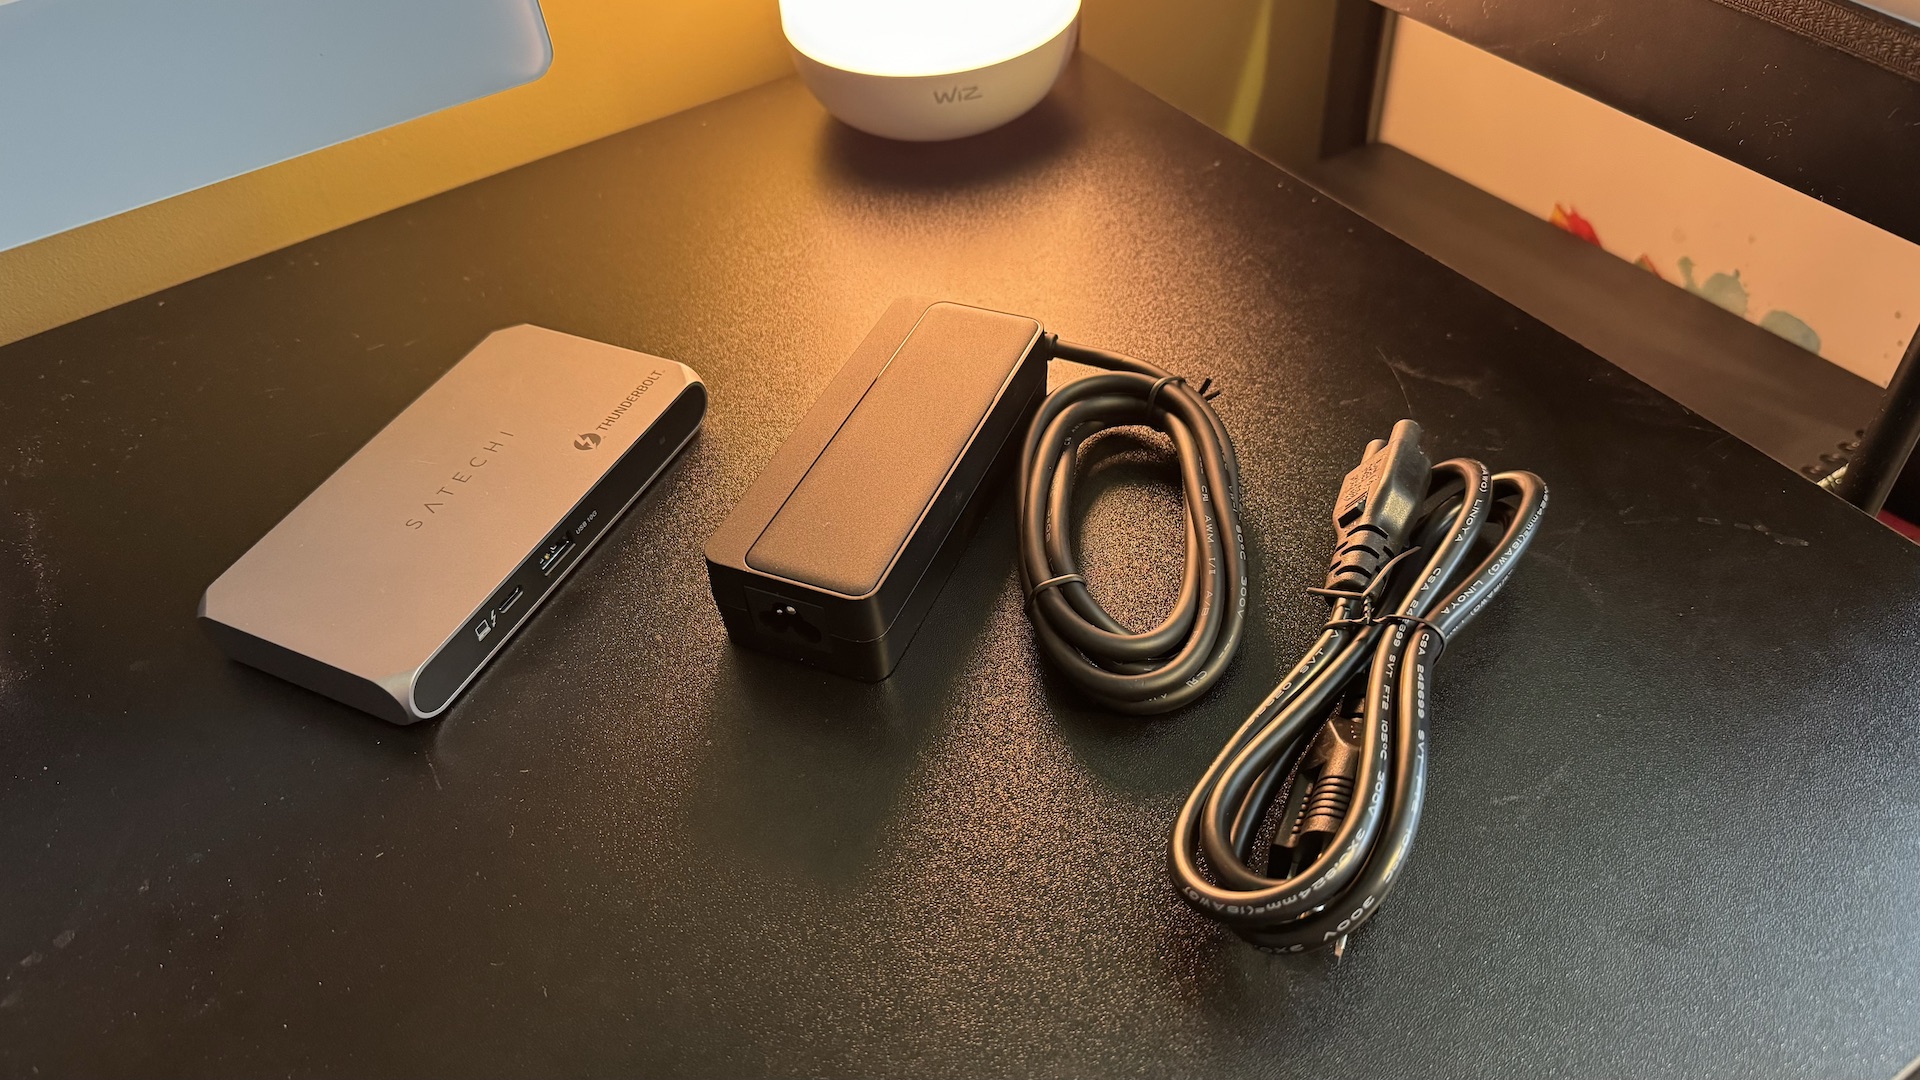 Satechi Thunderbolt 4 Slim Pro Hub on a black desk with Mac and accessories